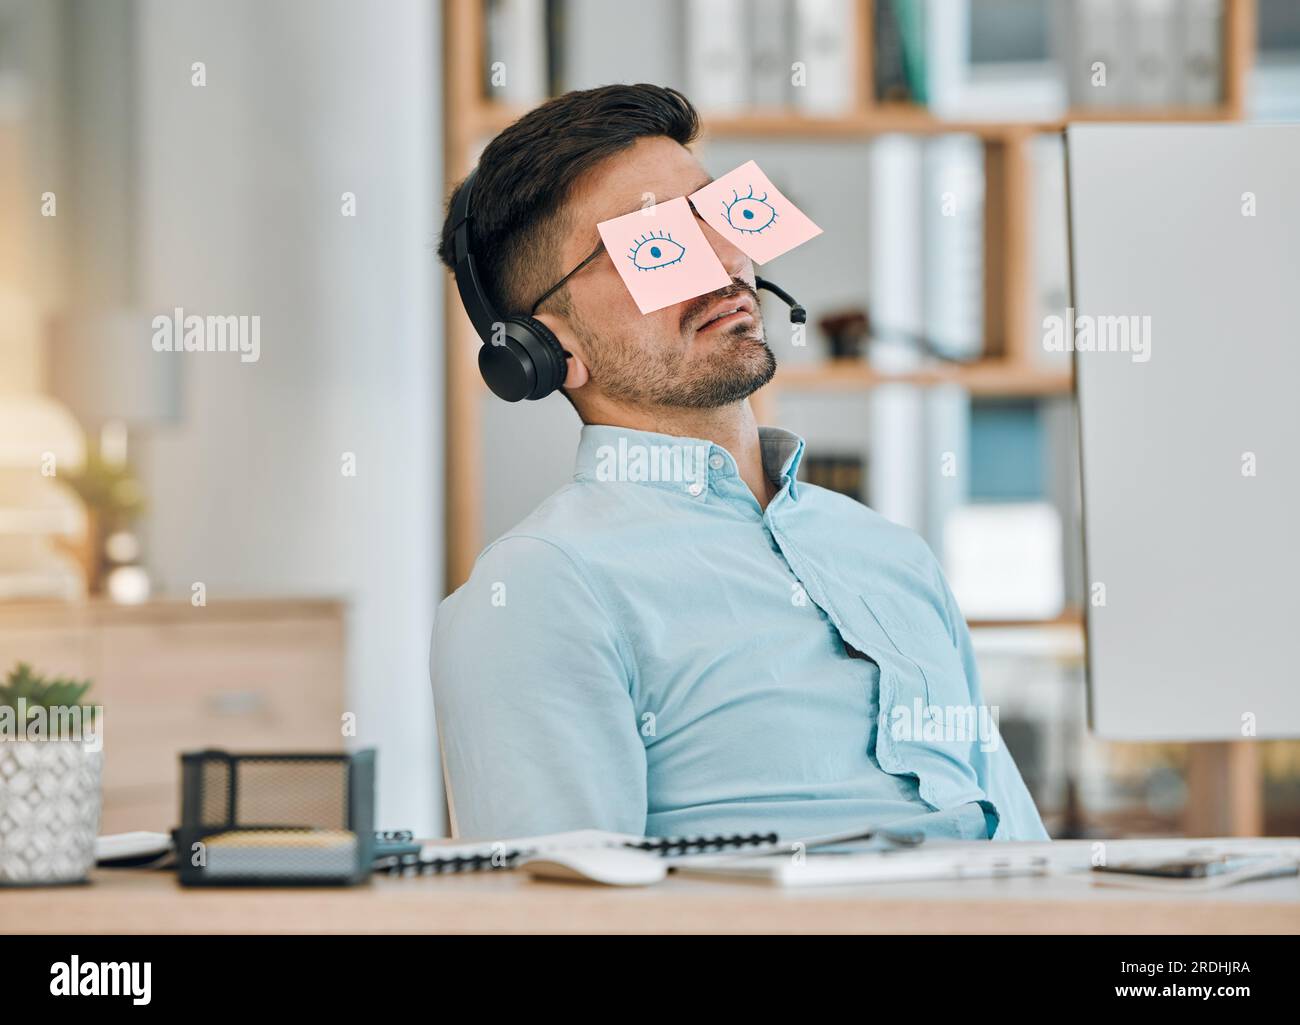 Tired, sleeping and business man with sticky note eyes from low energy and burnout at office desk. Fatigue, nap and rest of a male professional with Stock Photo